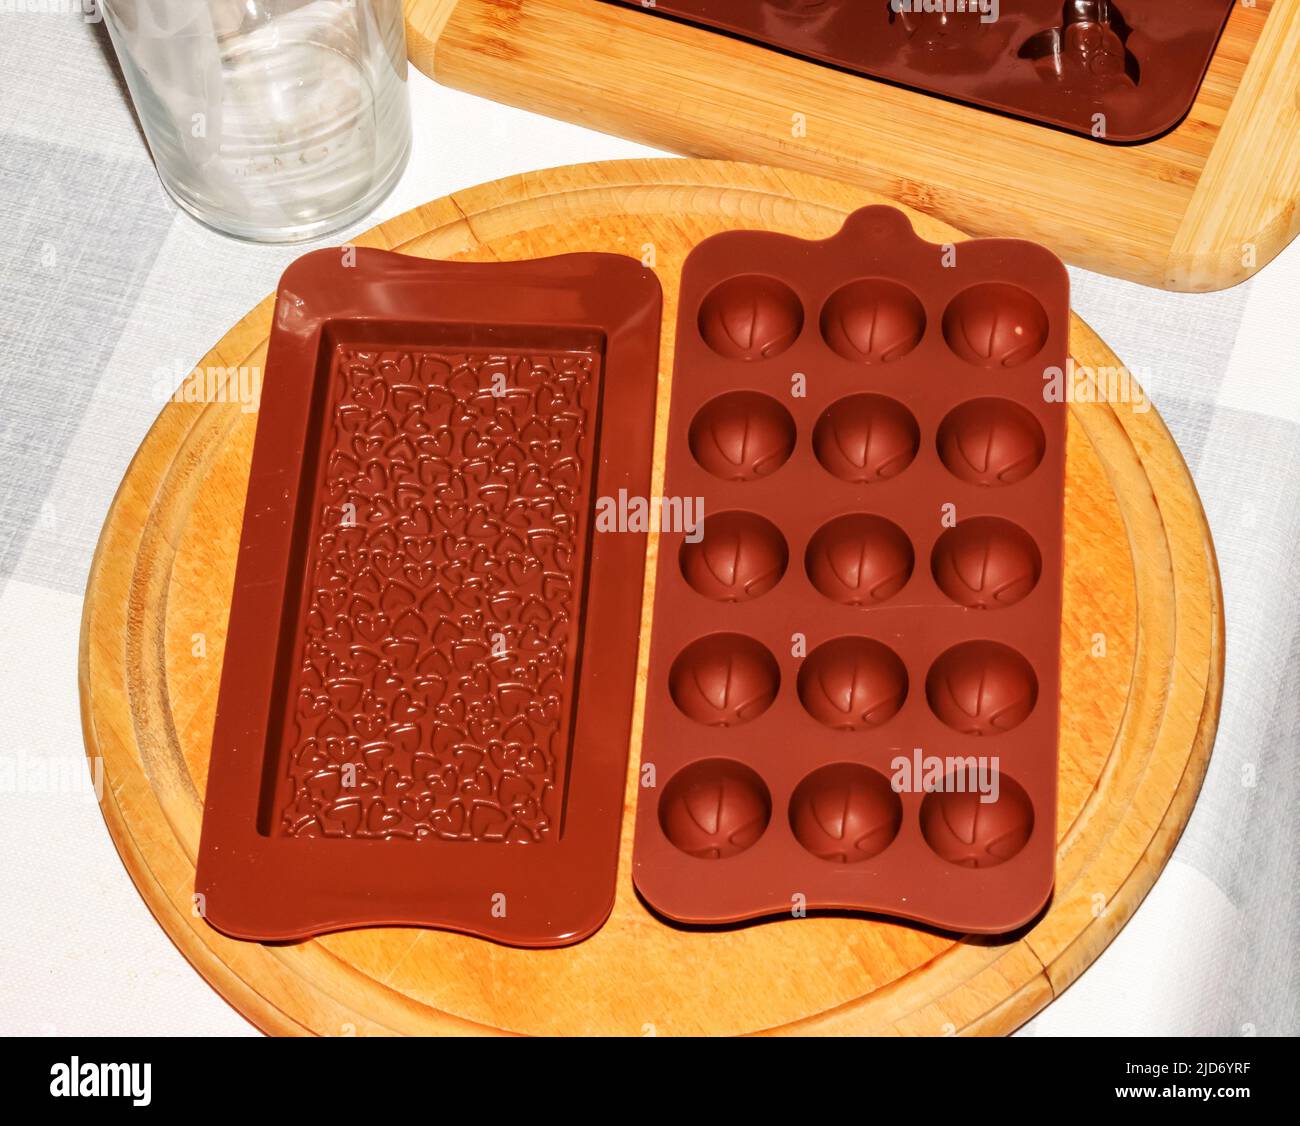 Silicone molds for shaping chocolate and sweets. Stock Photo